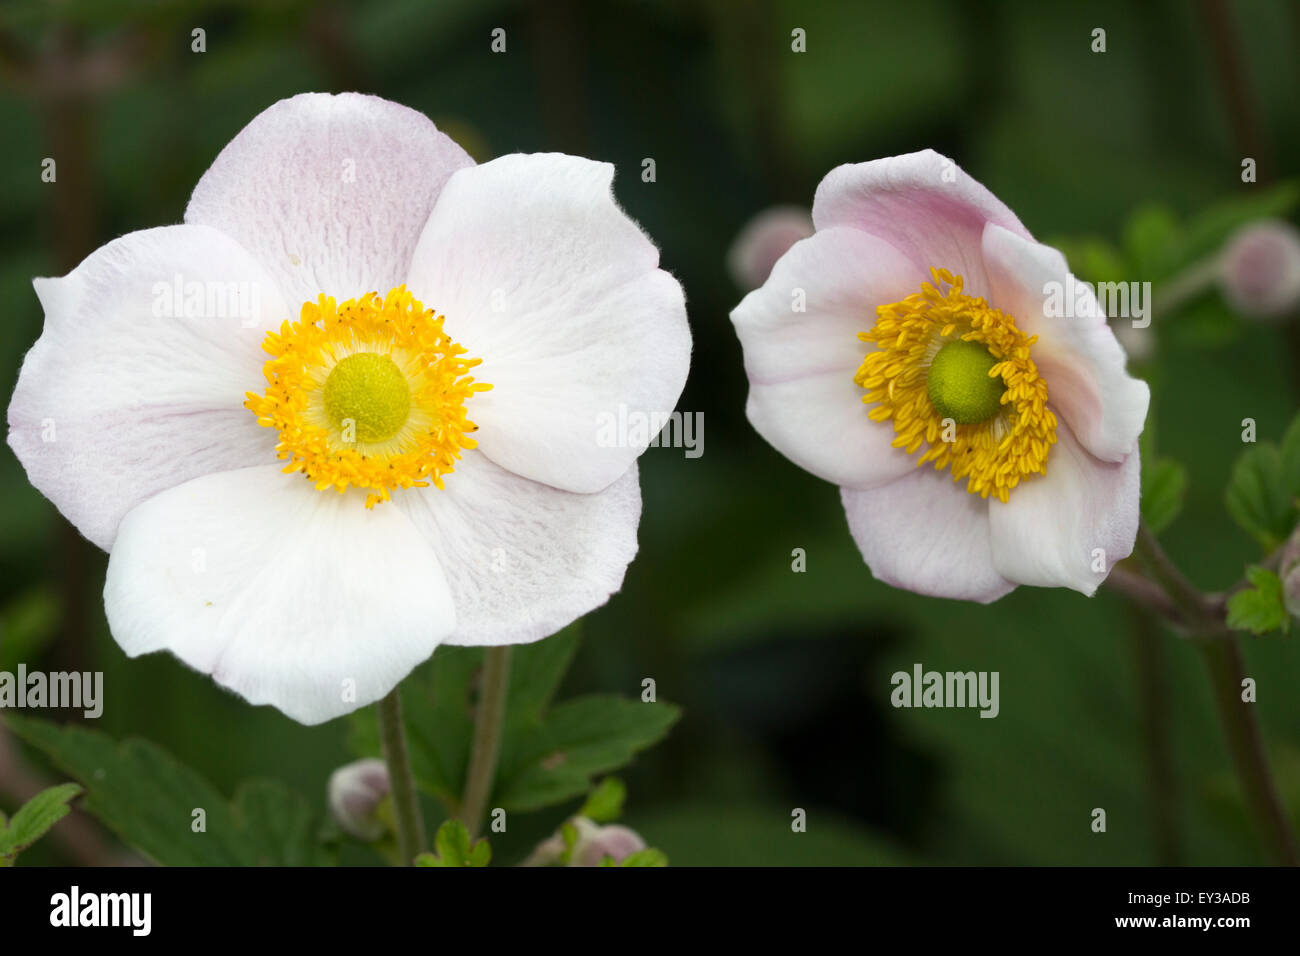 July flowers of the early Japanese Anemone, Anemone tomentosa 'Robustissima' Stock Photo